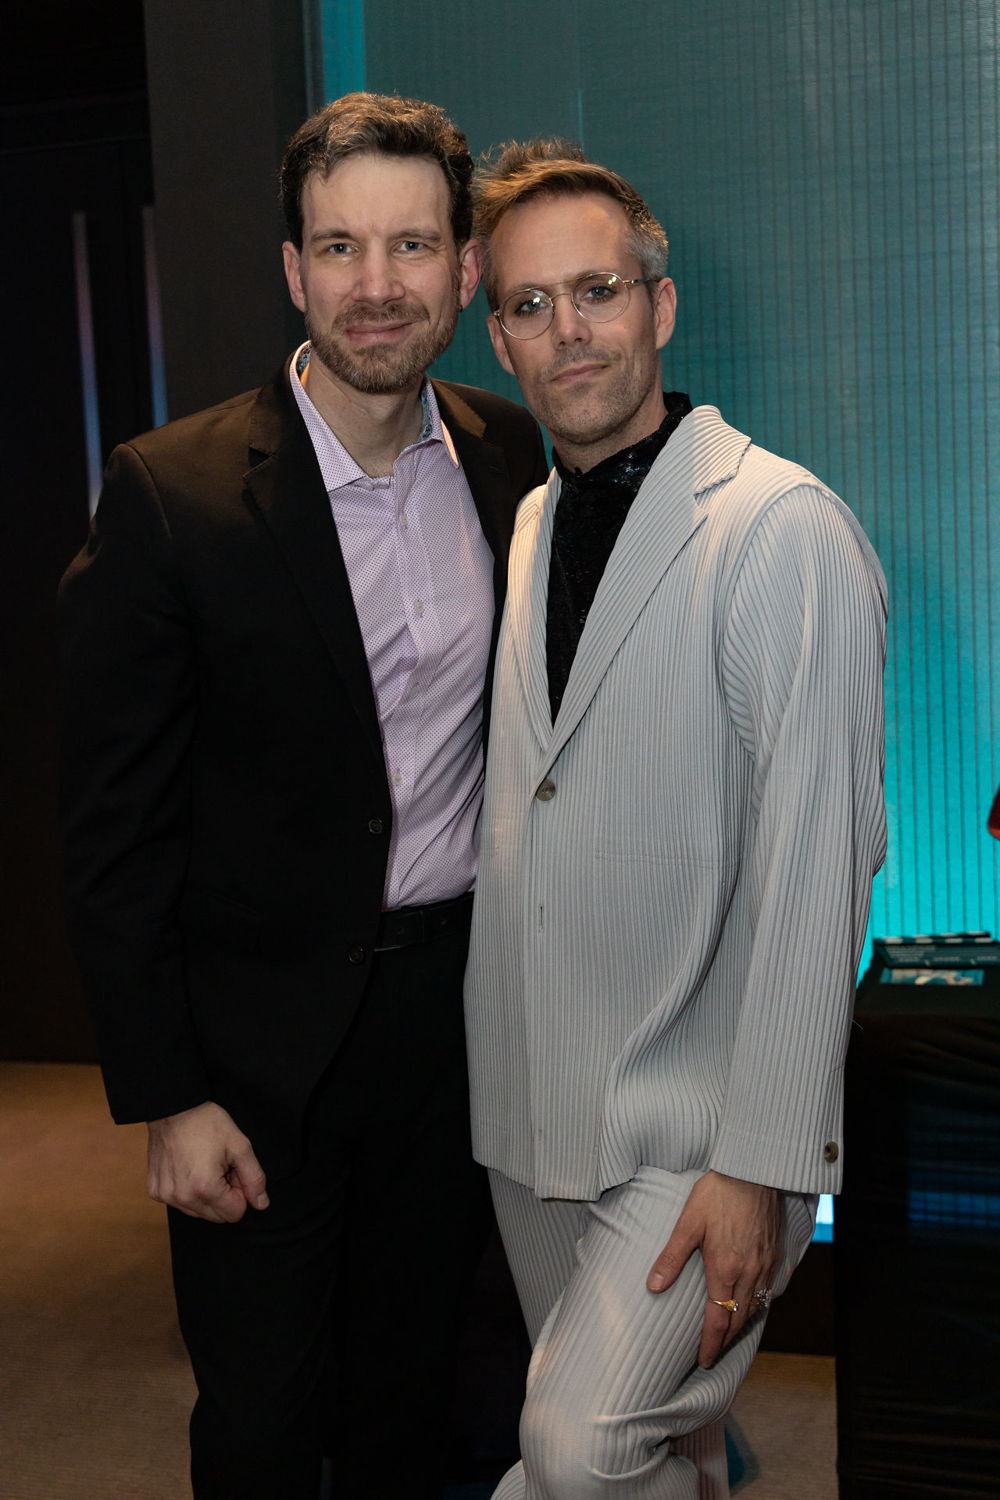 Head of School, Jason Patera, and Songwriter and Alum, Justin Tranter (Musical Theatre '98)(CREDIT: Michele Marie Photography MicheleMariePhotography.com)